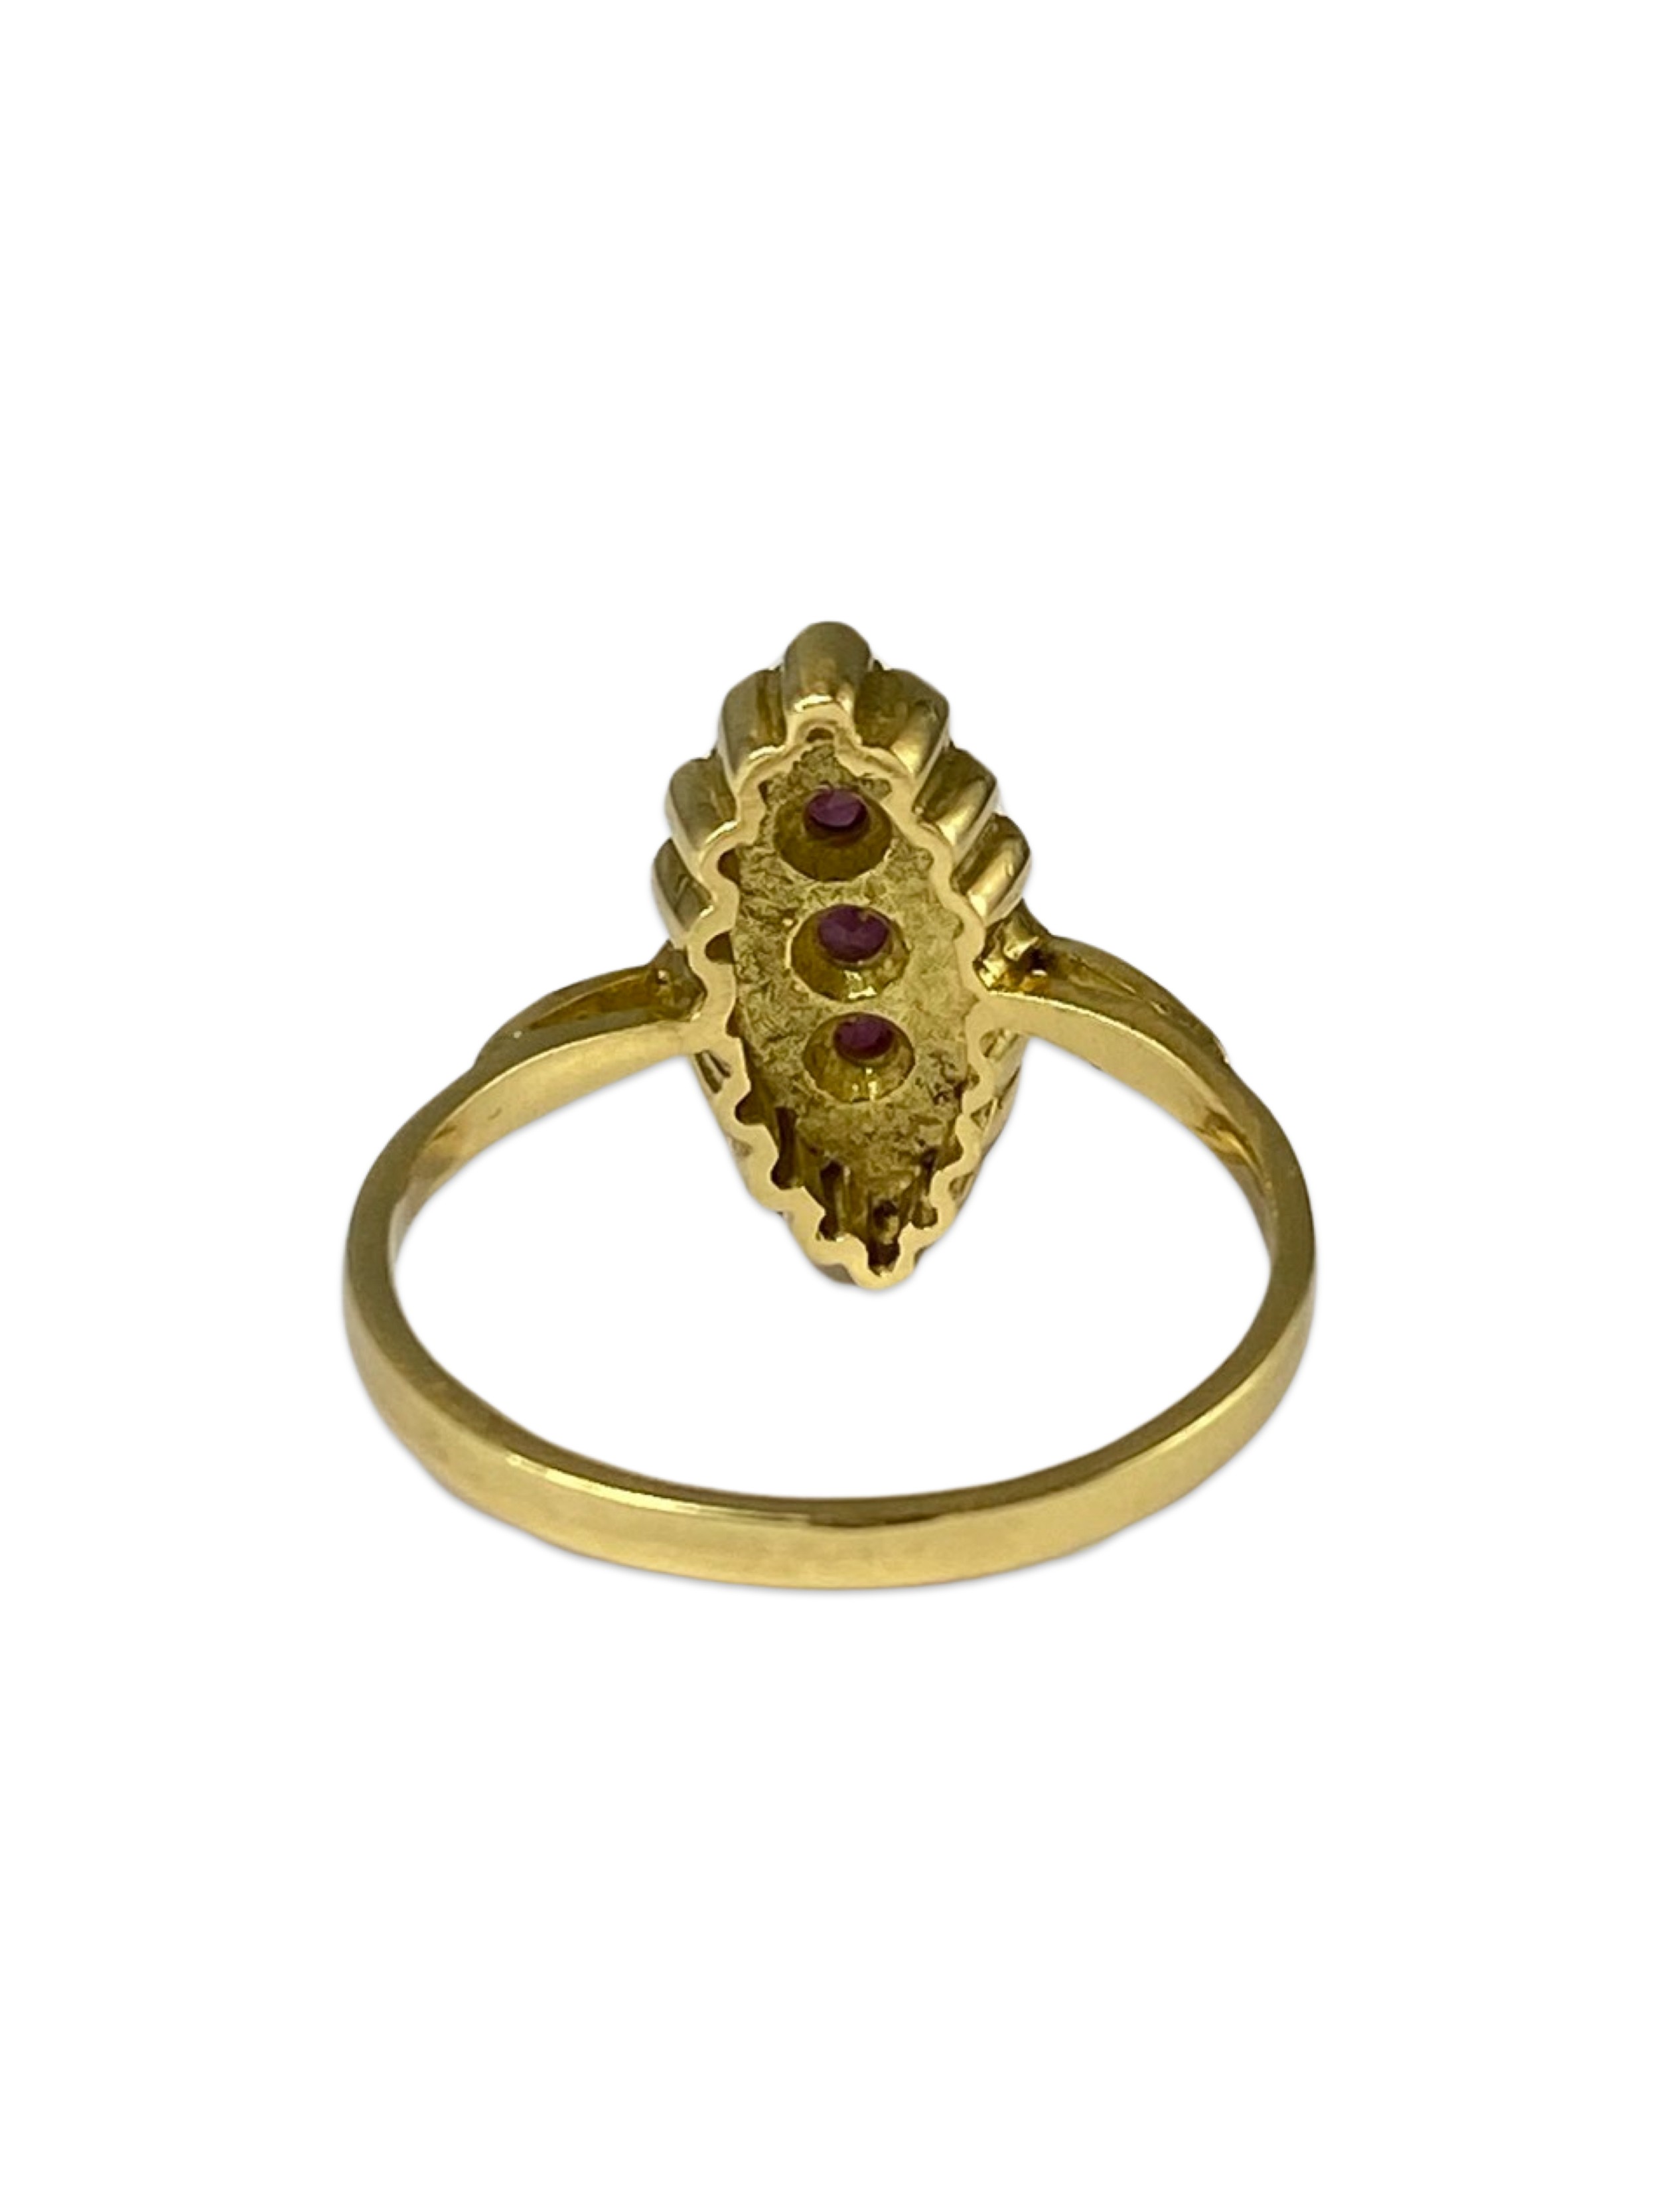 18ct Yellow Gold London 1989 Fancy Design Pink Stone and Diamond ring weighing 3.99 grams size M 1/2 - Image 2 of 2